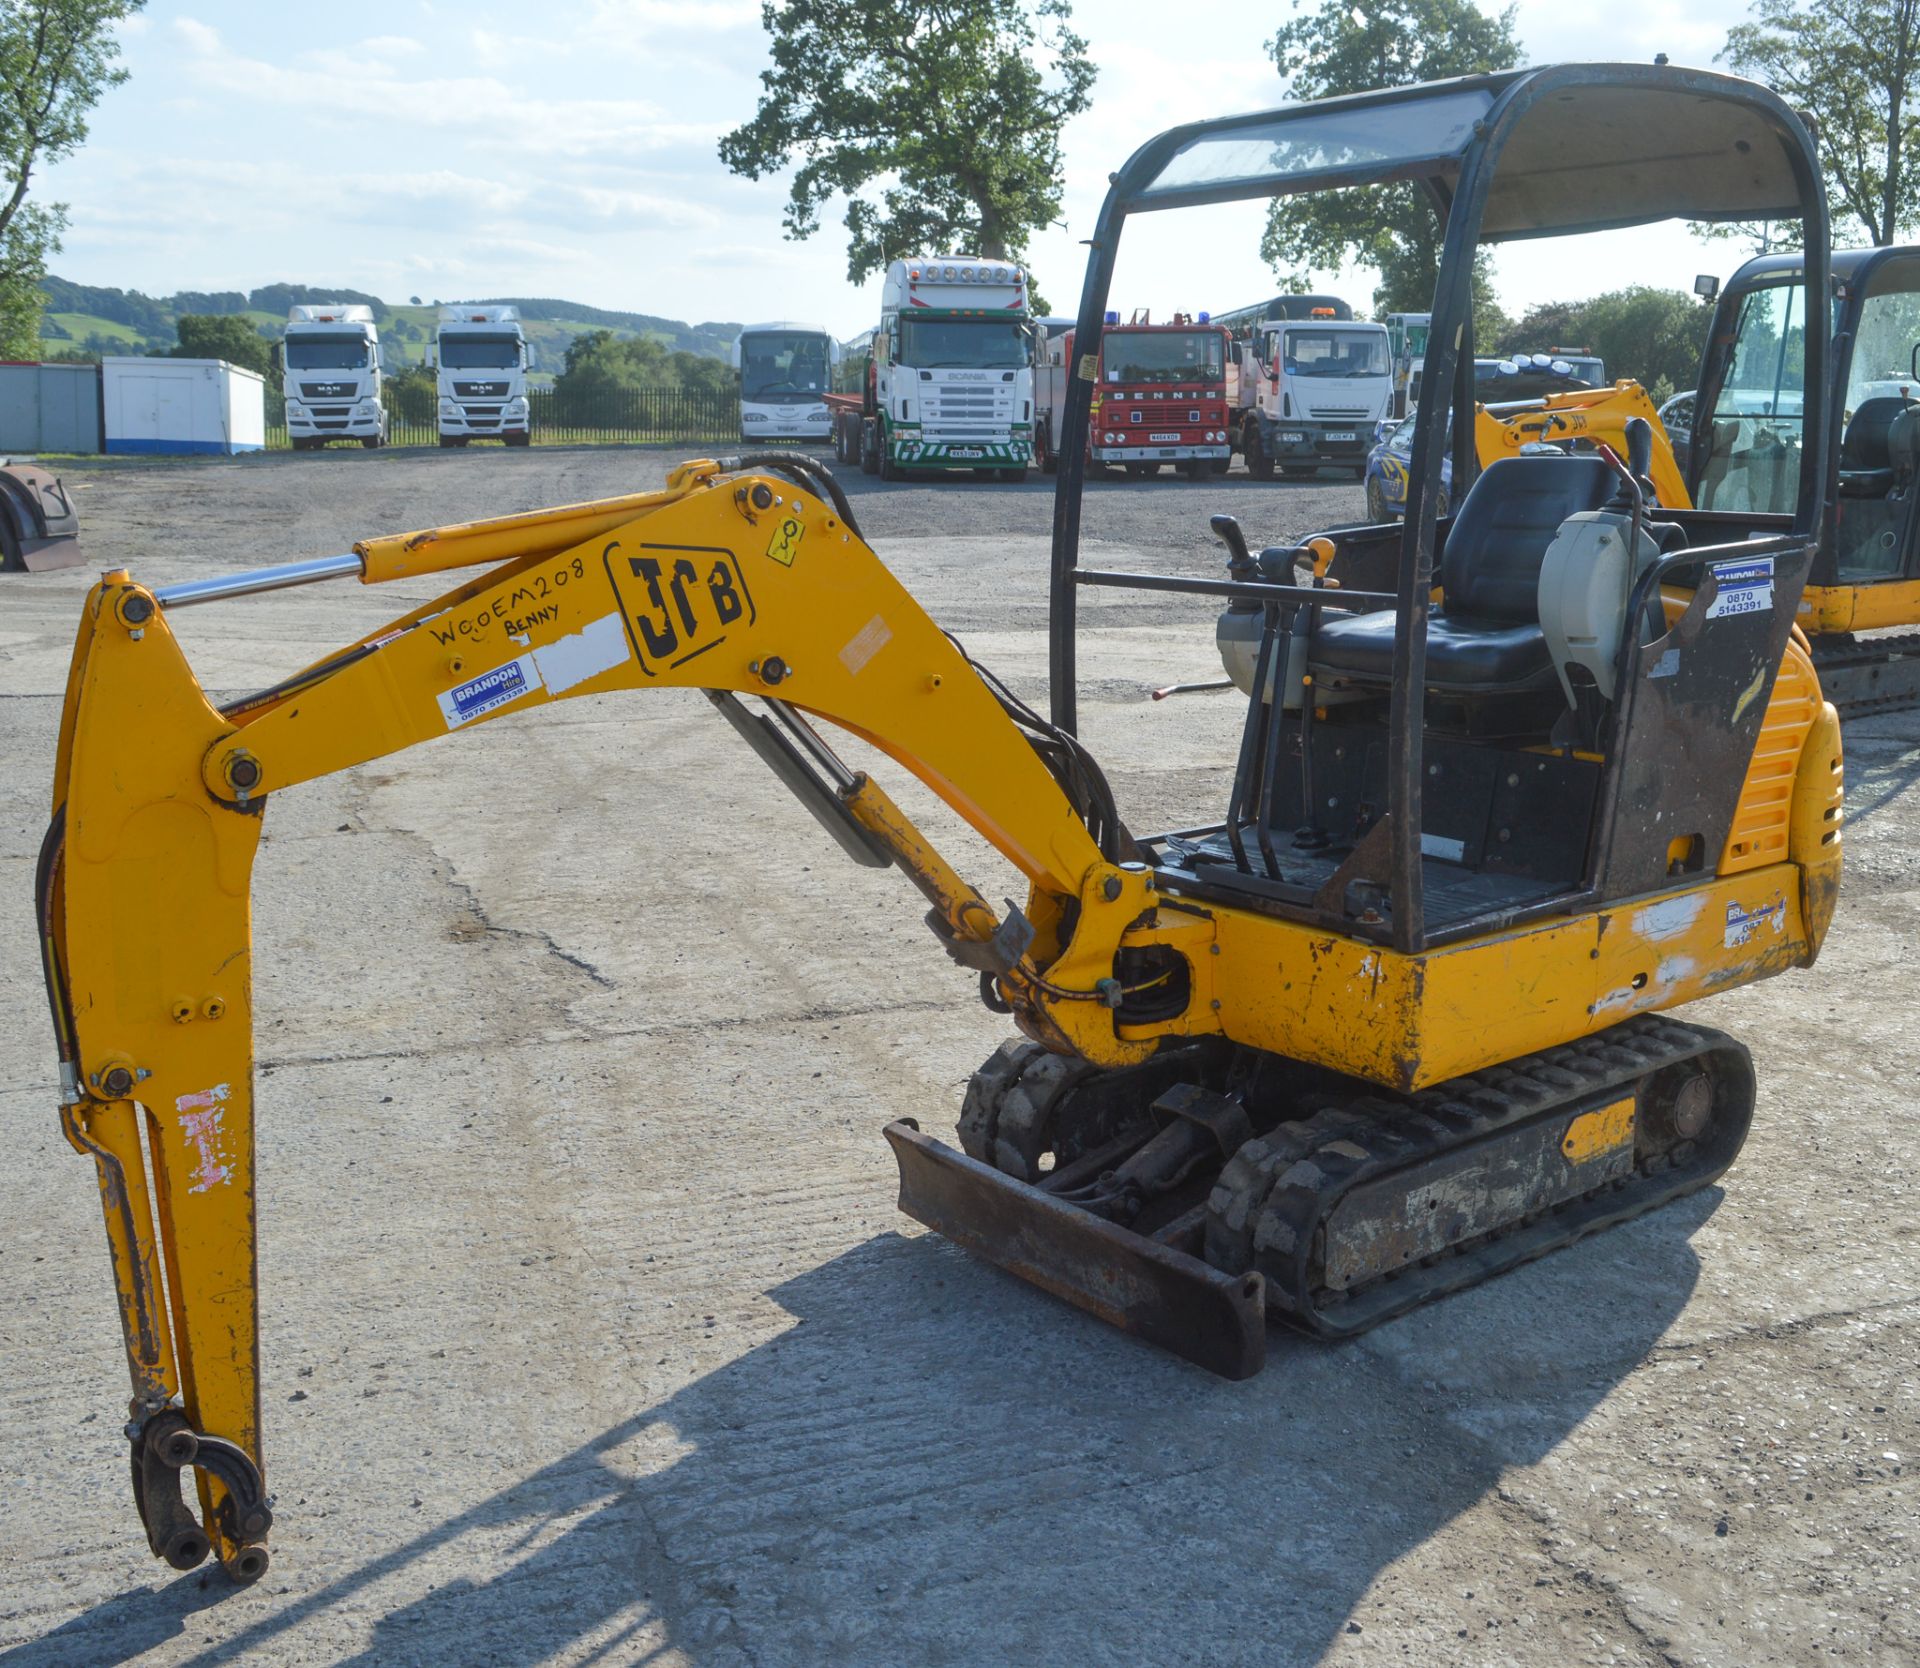 JCB 8015 1.5 tonne rubber tracked mini excavator Year: 2003 S/N: 1020624 Recorded hours: 3225